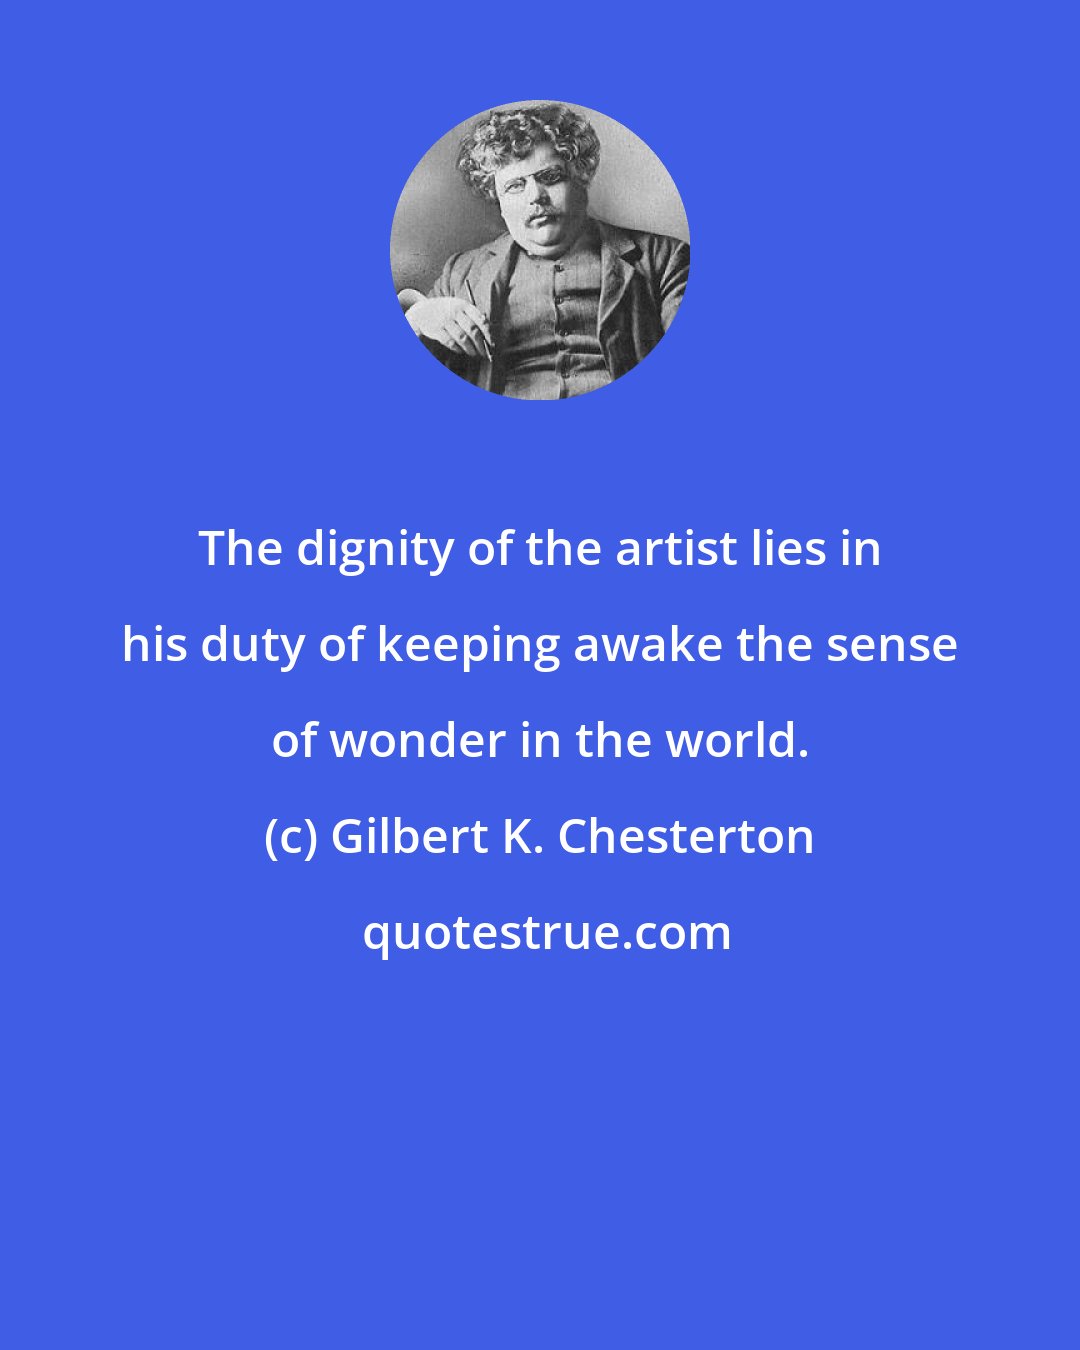 Gilbert K. Chesterton: The dignity of the artist lies in his duty of keeping awake the sense of wonder in the world.